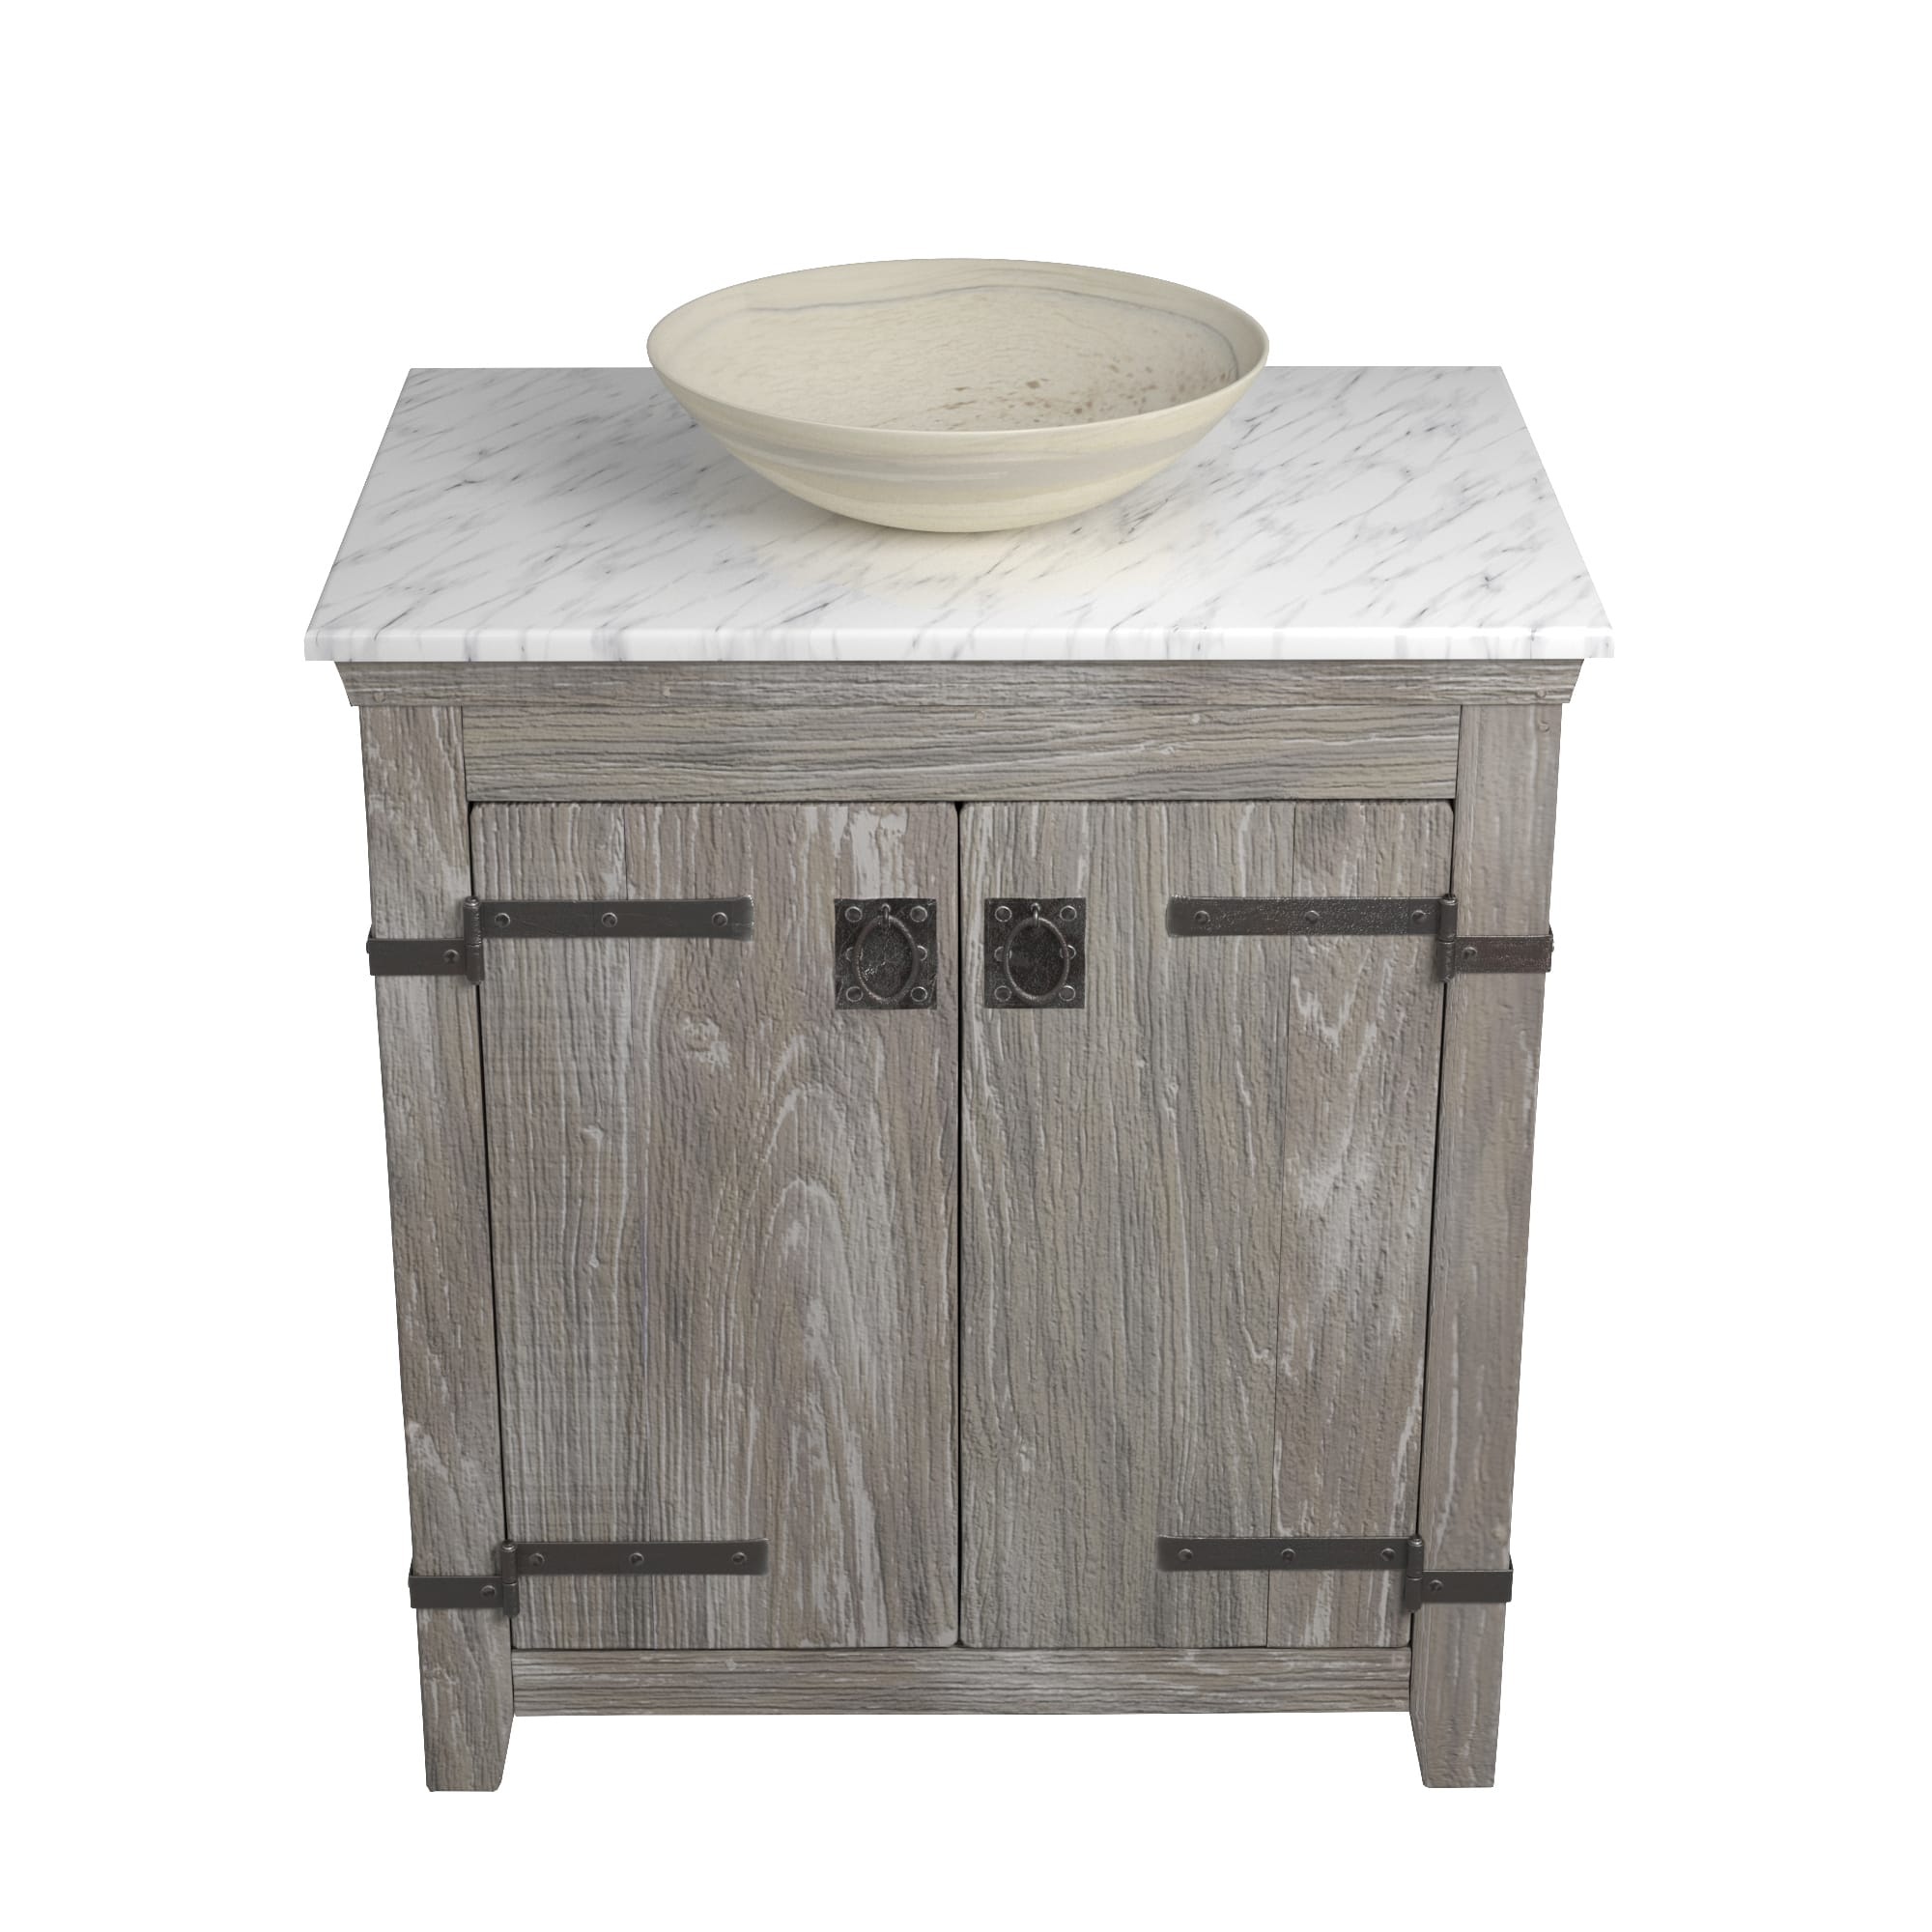 Native Trails 30" Americana Vanity in Driftwood with Carrara Marble Top and Verona in Beachcomber, Single Faucet Hole, BND30-VB-CT-MG-087